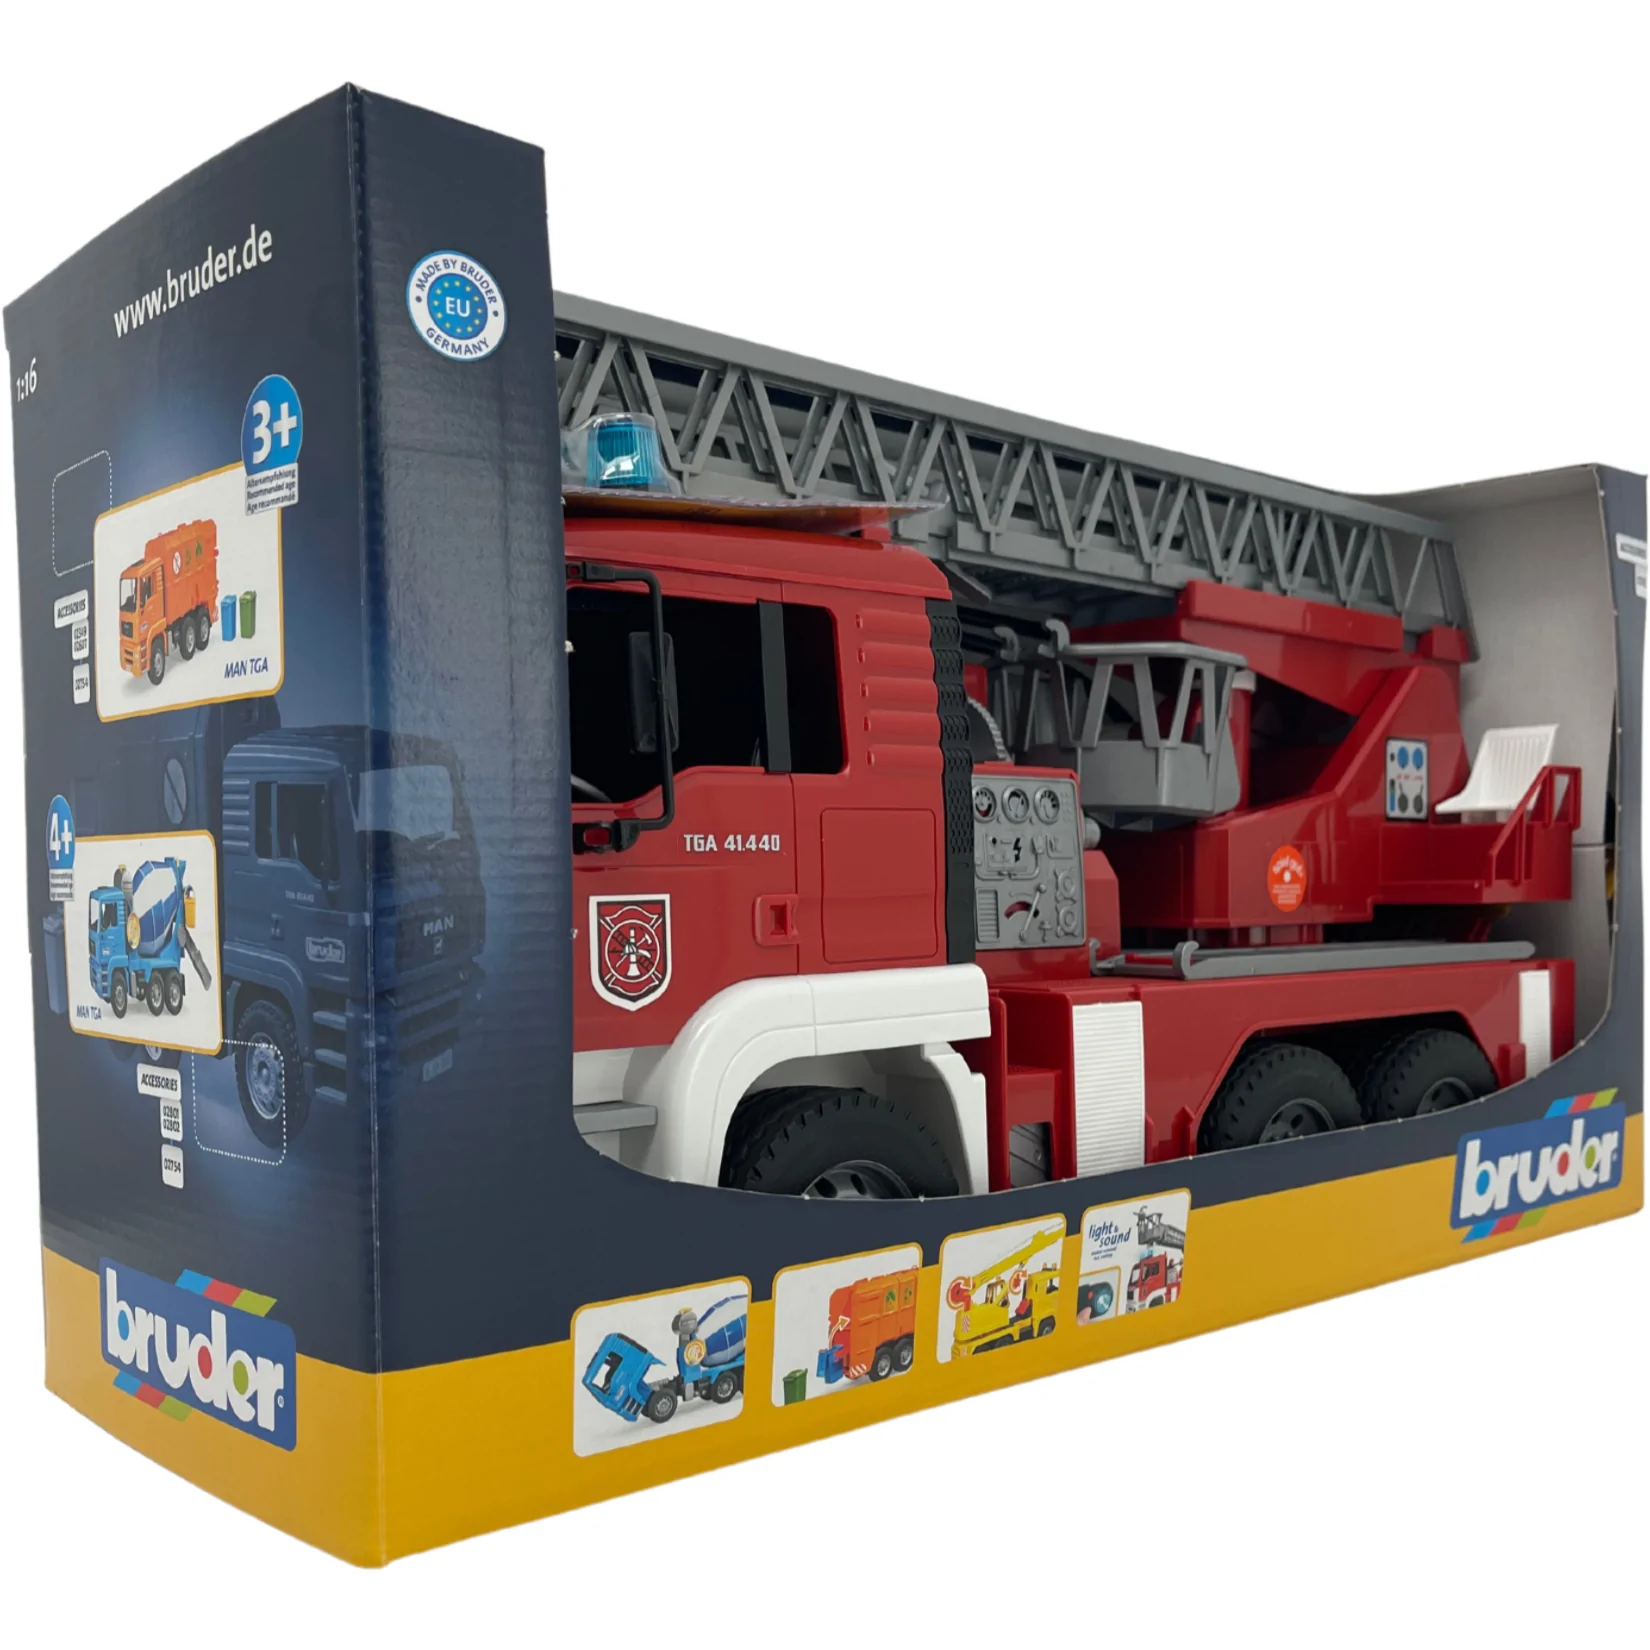 Bruder Fire Truck Toy / Emergency Response Vehicle Toy / Light and Sound / Red Fire Engine